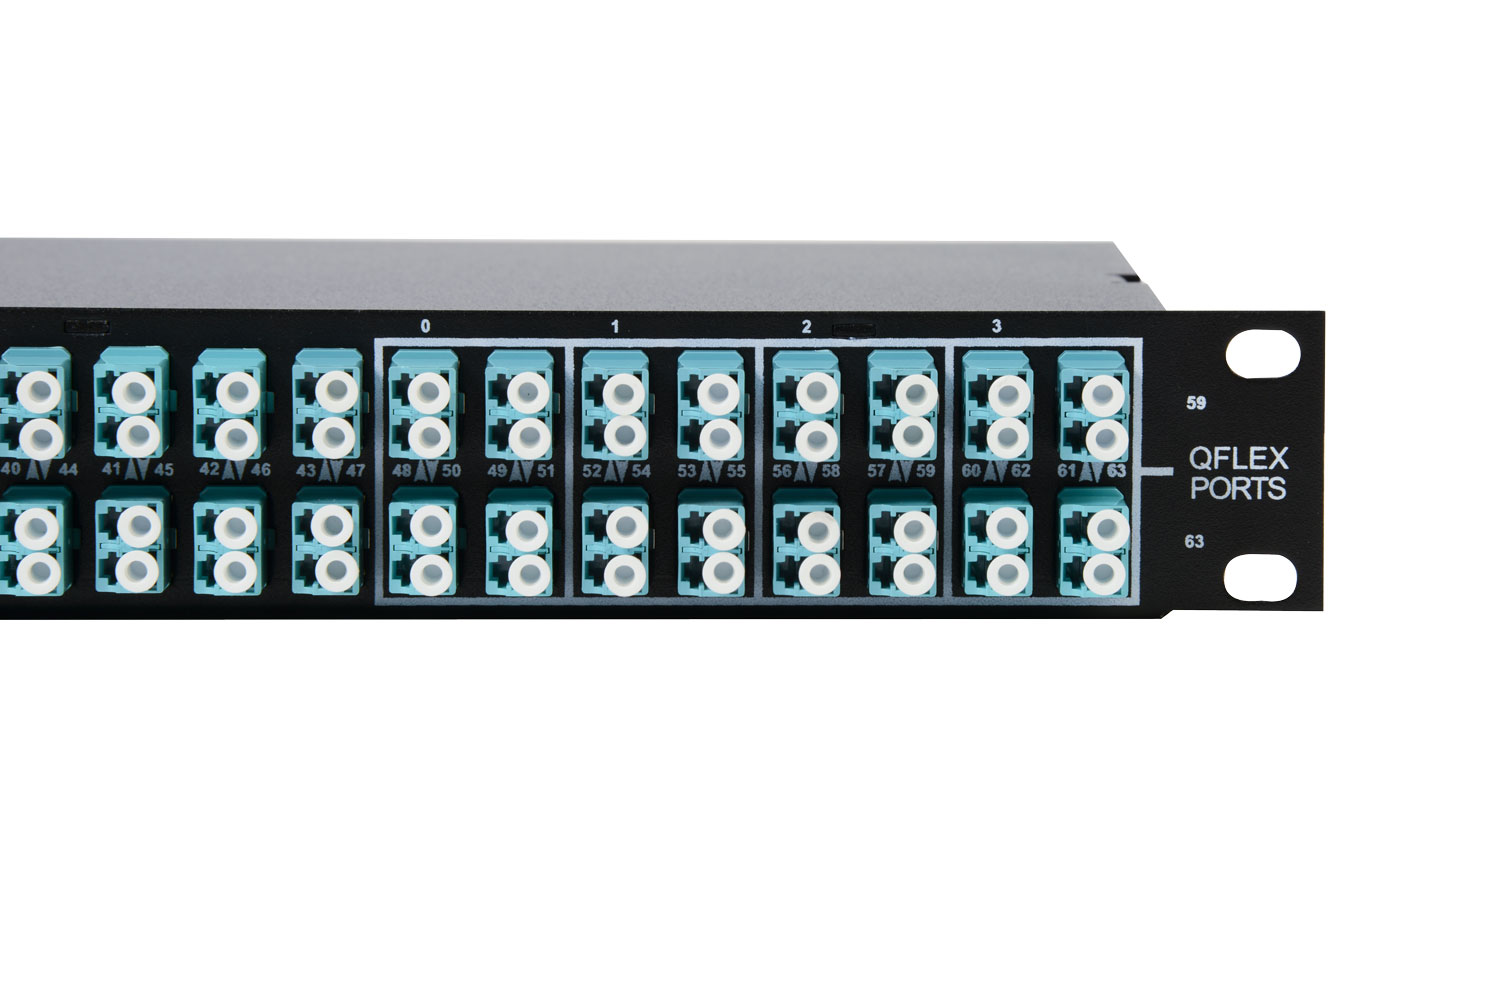 Port Replication Patch Panel for Brocade SAN hardware